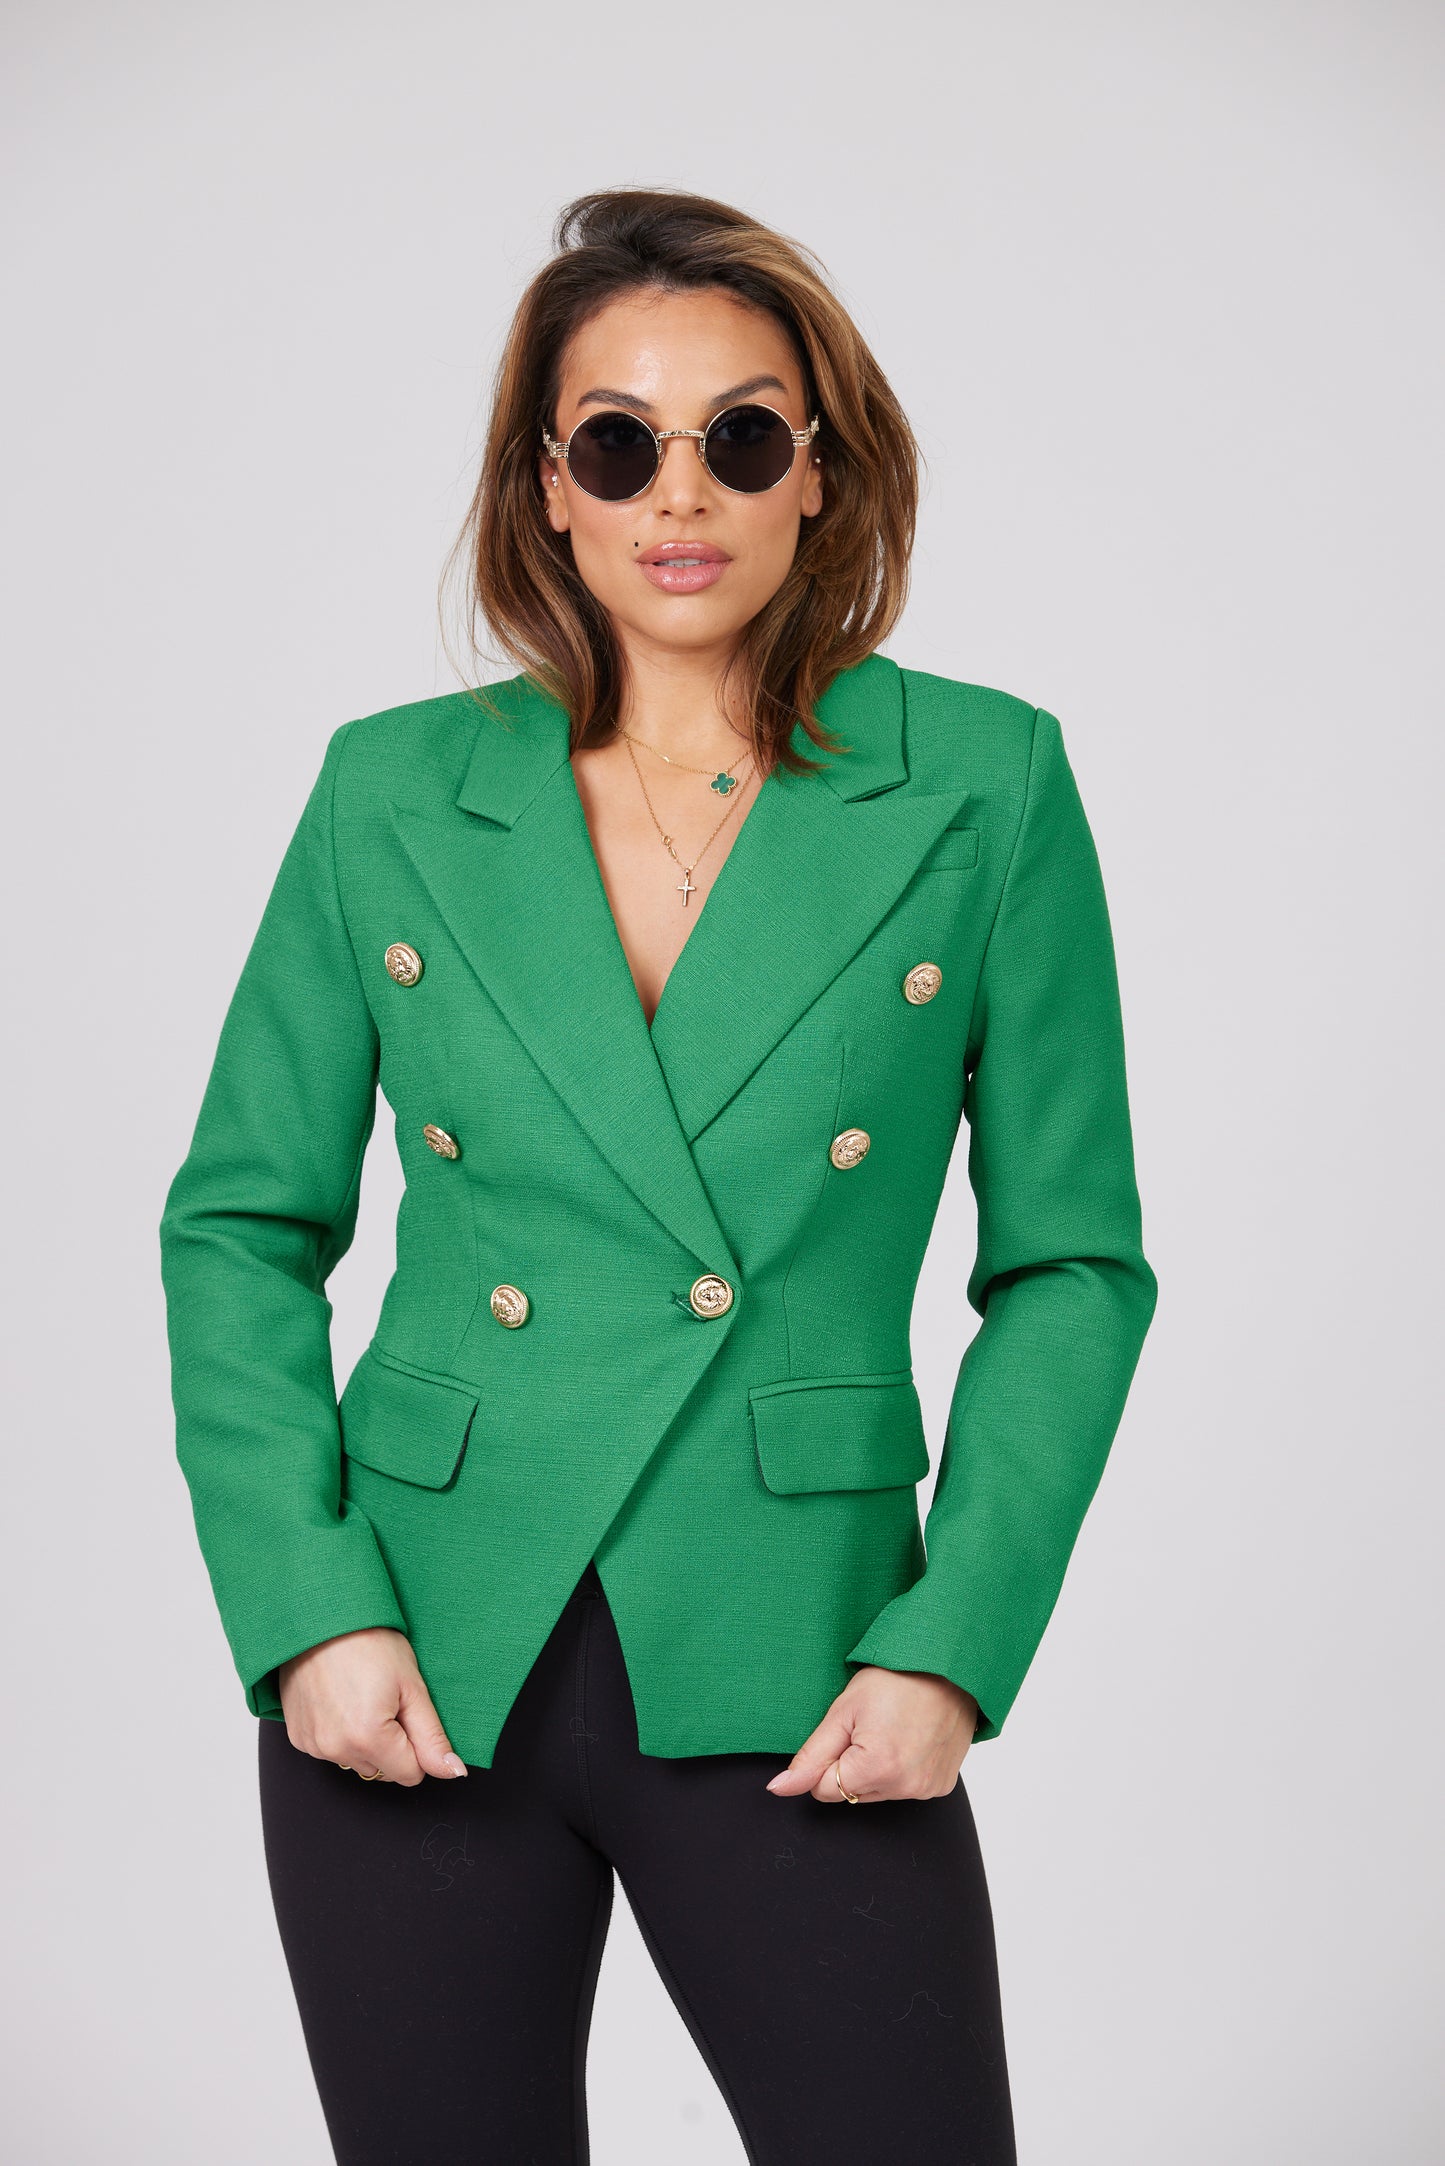 ICONIC EMERALD GREEN WITH GOLD BUTTON BLAZER